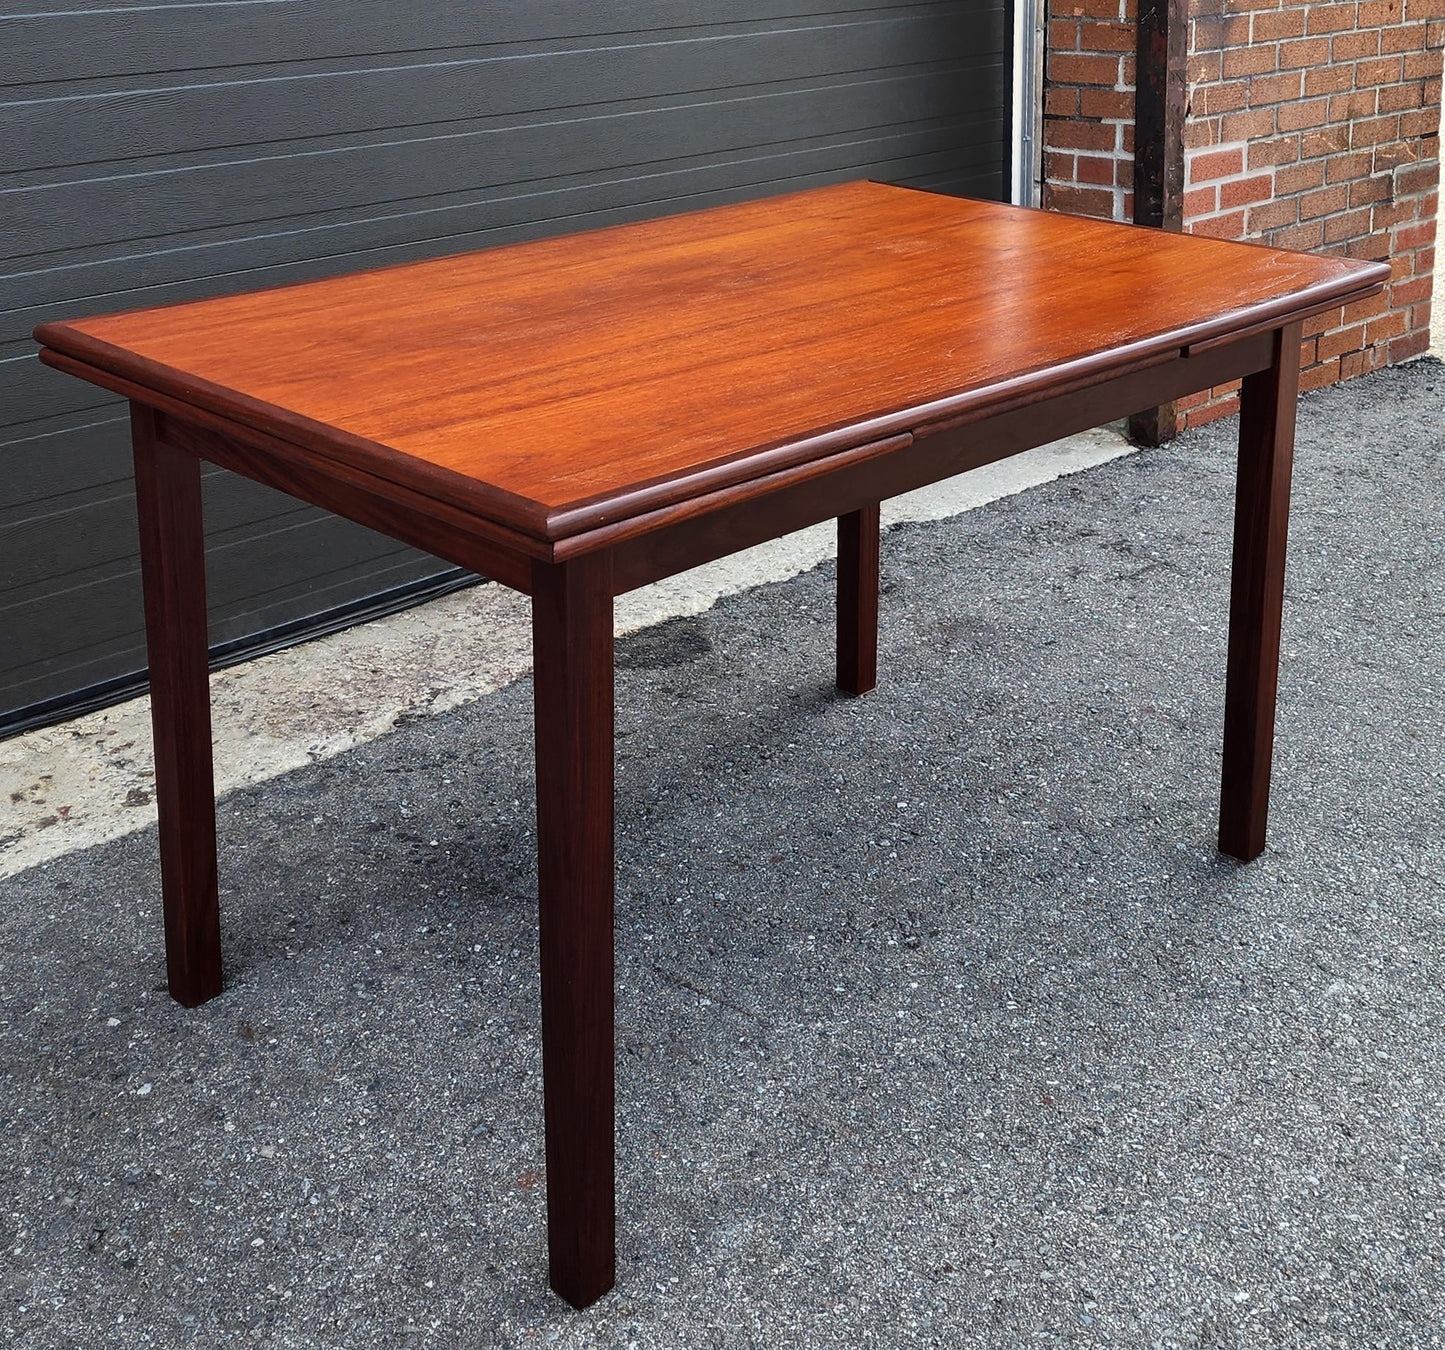 REFINISHED Mid Century Modern Teak Extension Dining Table or Desk 51"-86" by RS Associates